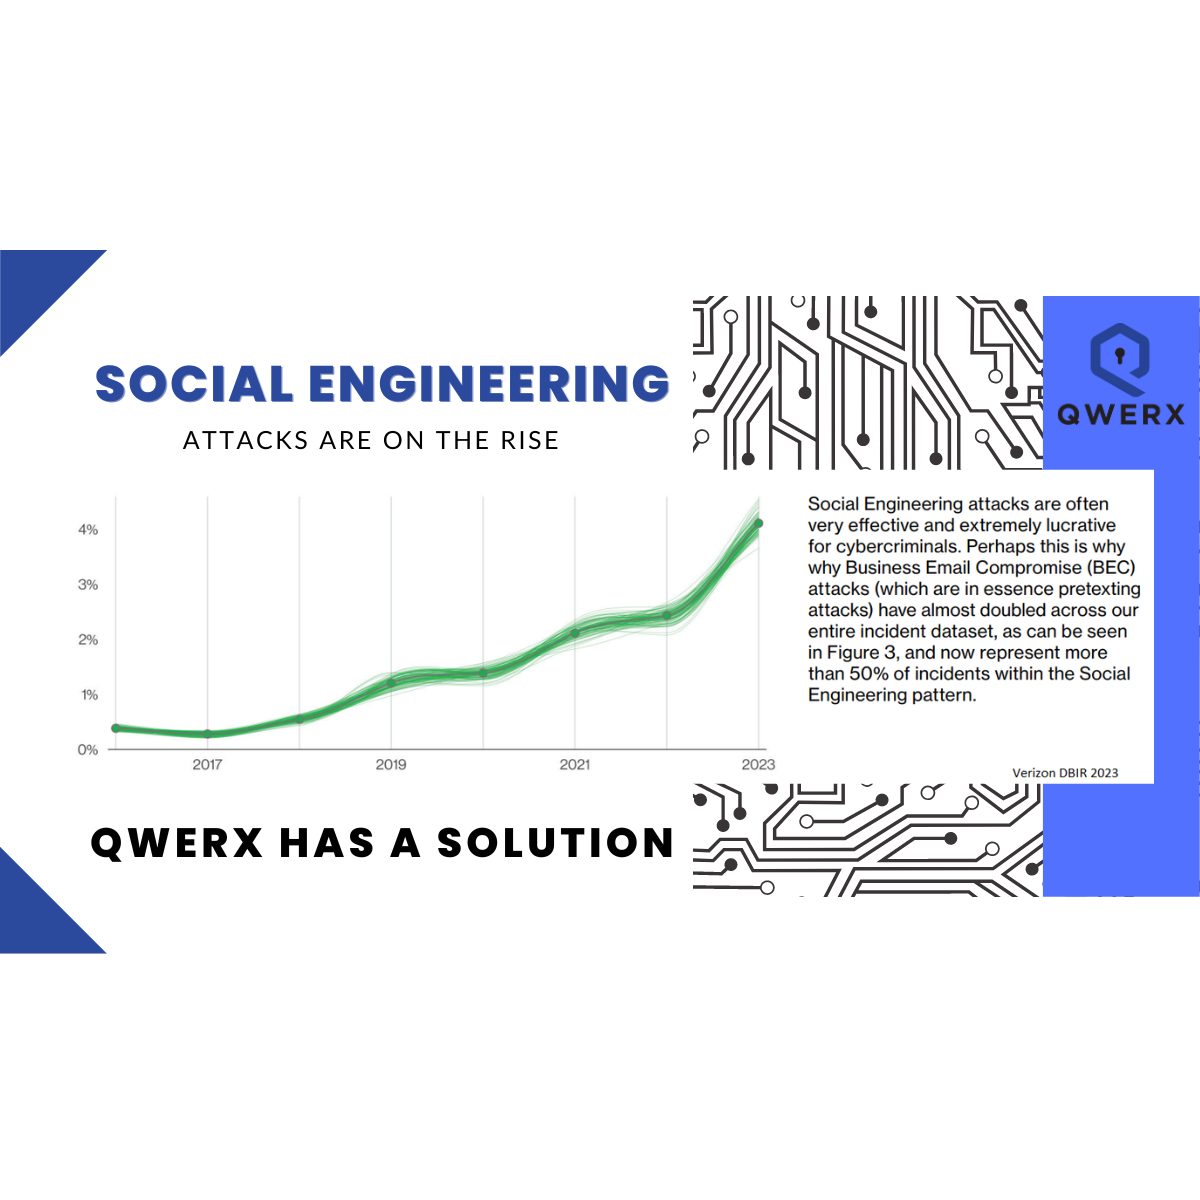 social engineering attacks are on the rise: QWERX has a solution with a snippet of the DBIR report chart showing social engineering attacks 